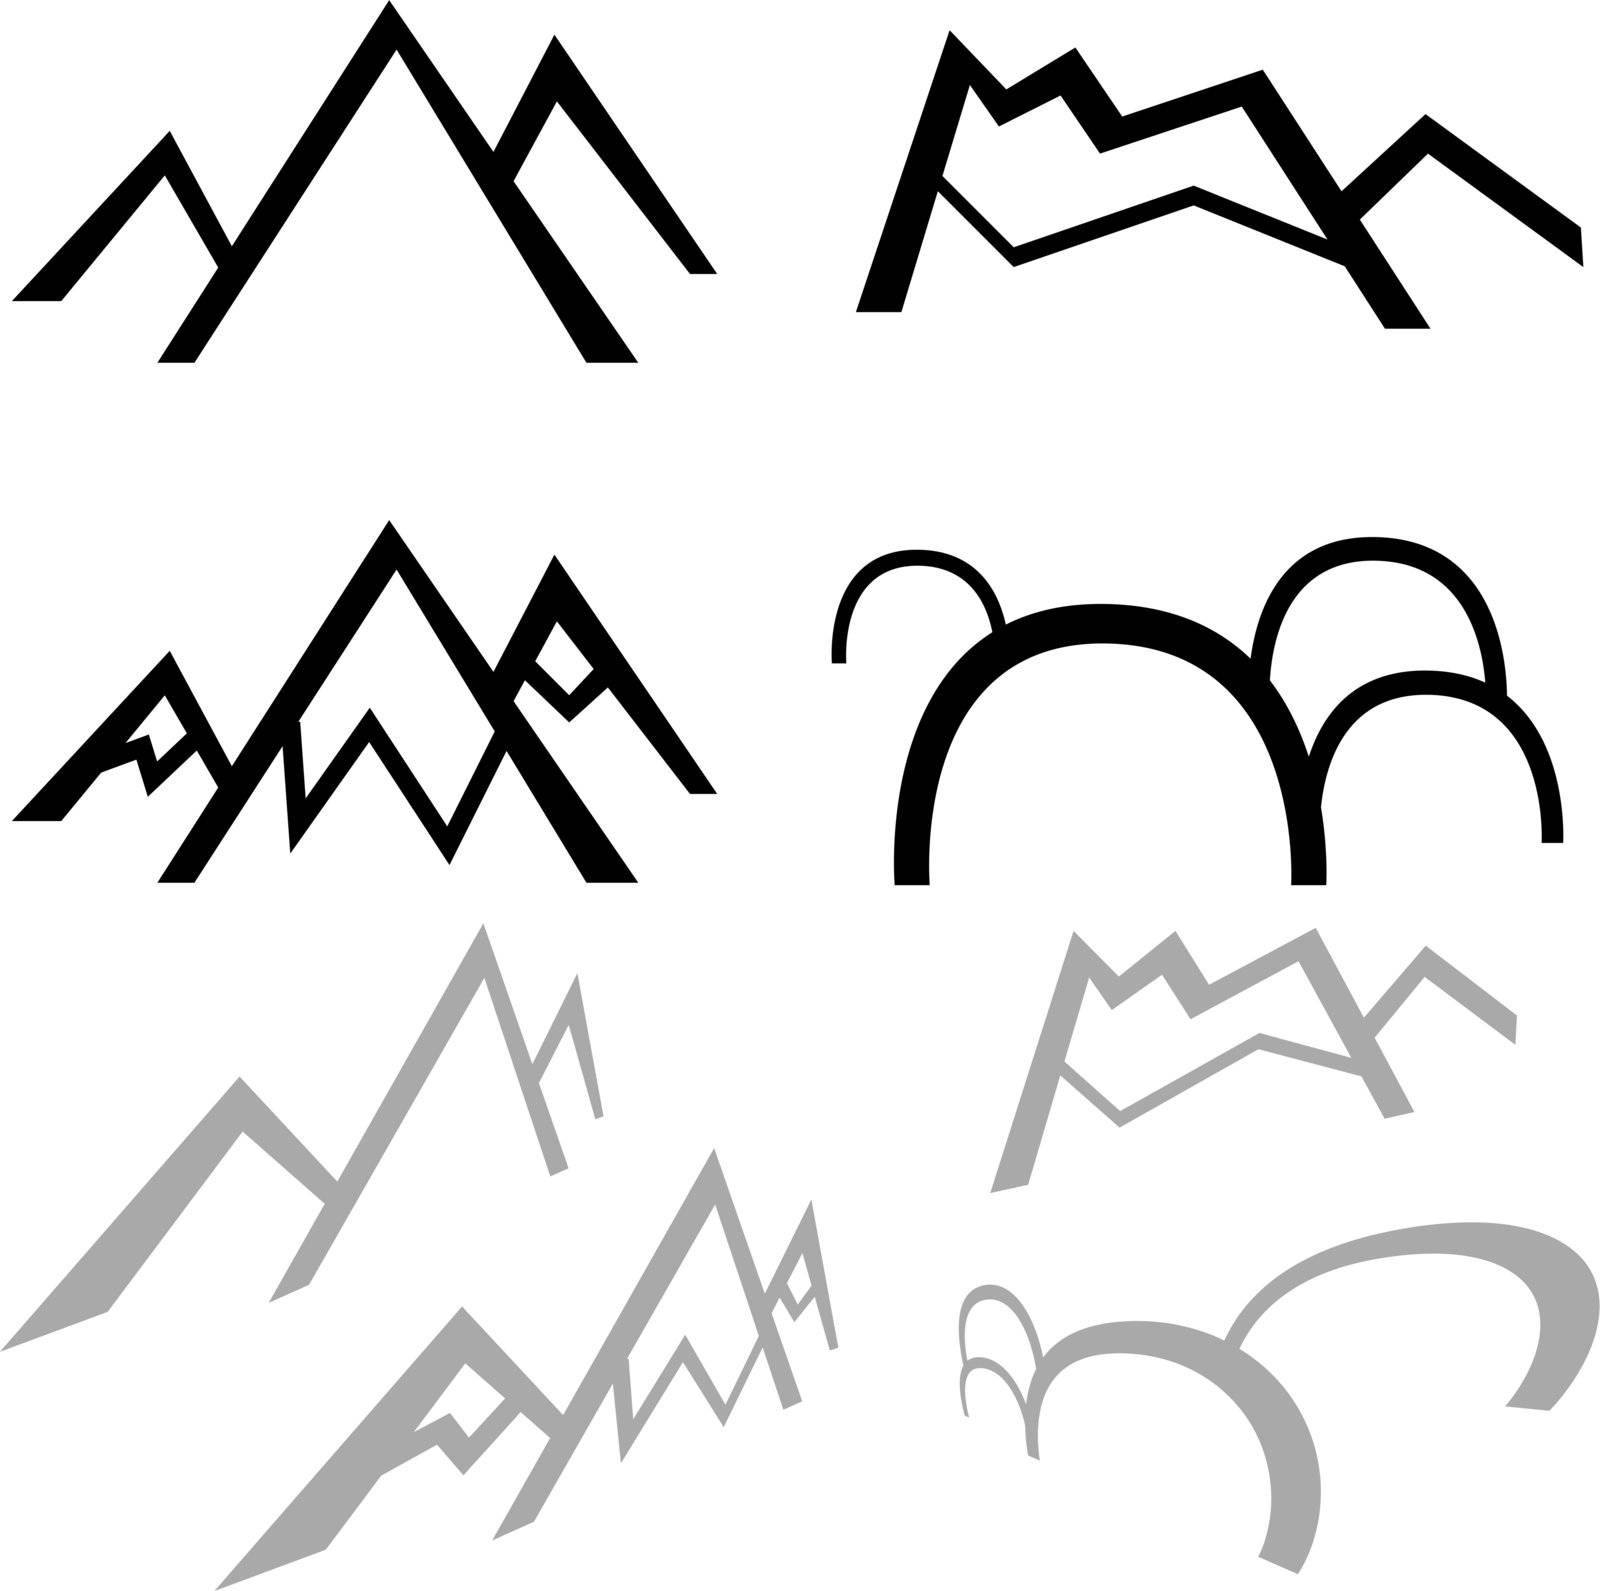 Simple mountains isolated on a white background.